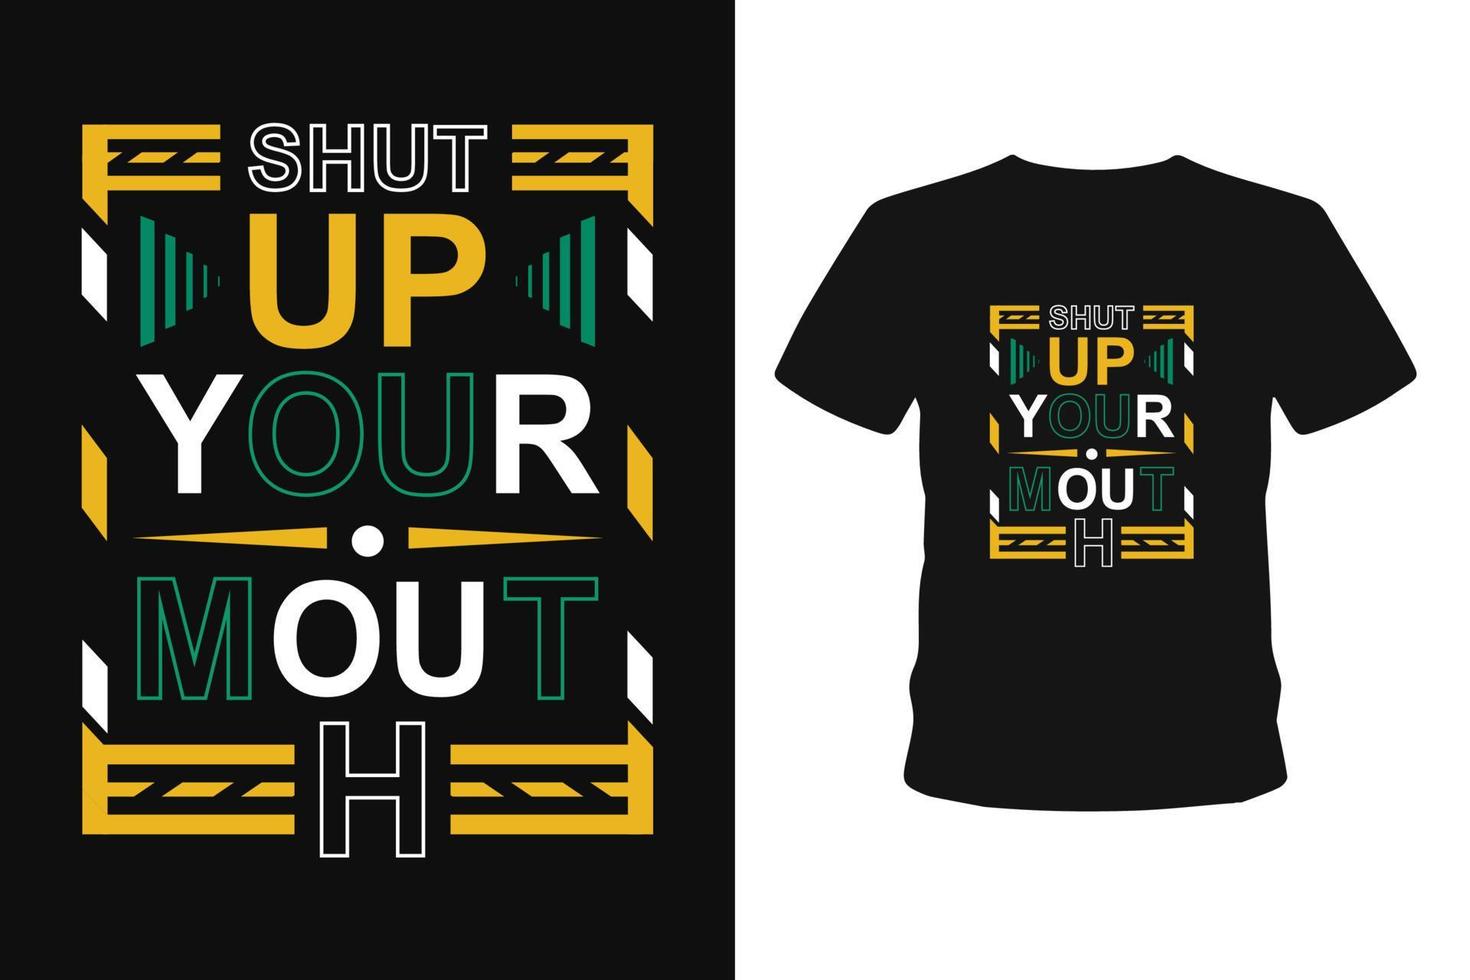 Shut up your mouth hand lettering calligraphy lettering quotes t shirt designs. vector